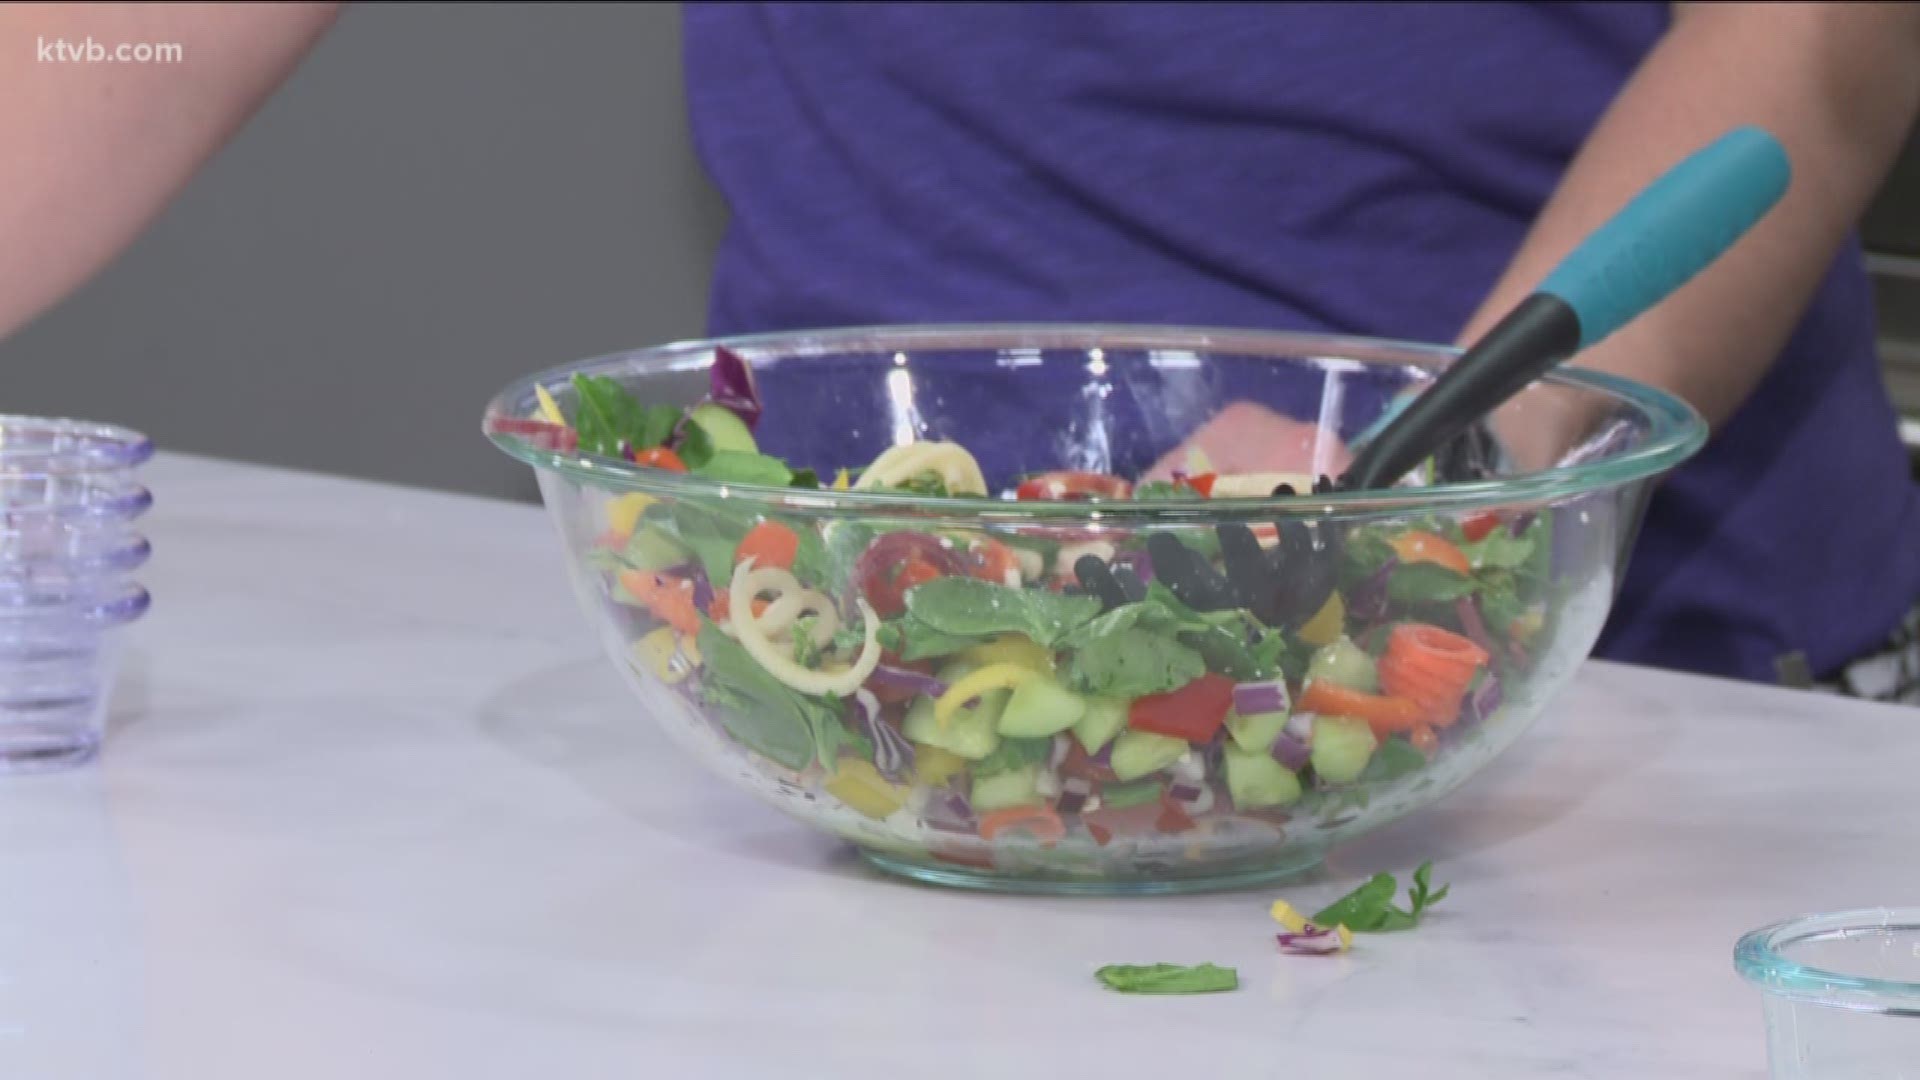 Nutrition and wellness coach Katie Hug shows us how to make her superfood salad.